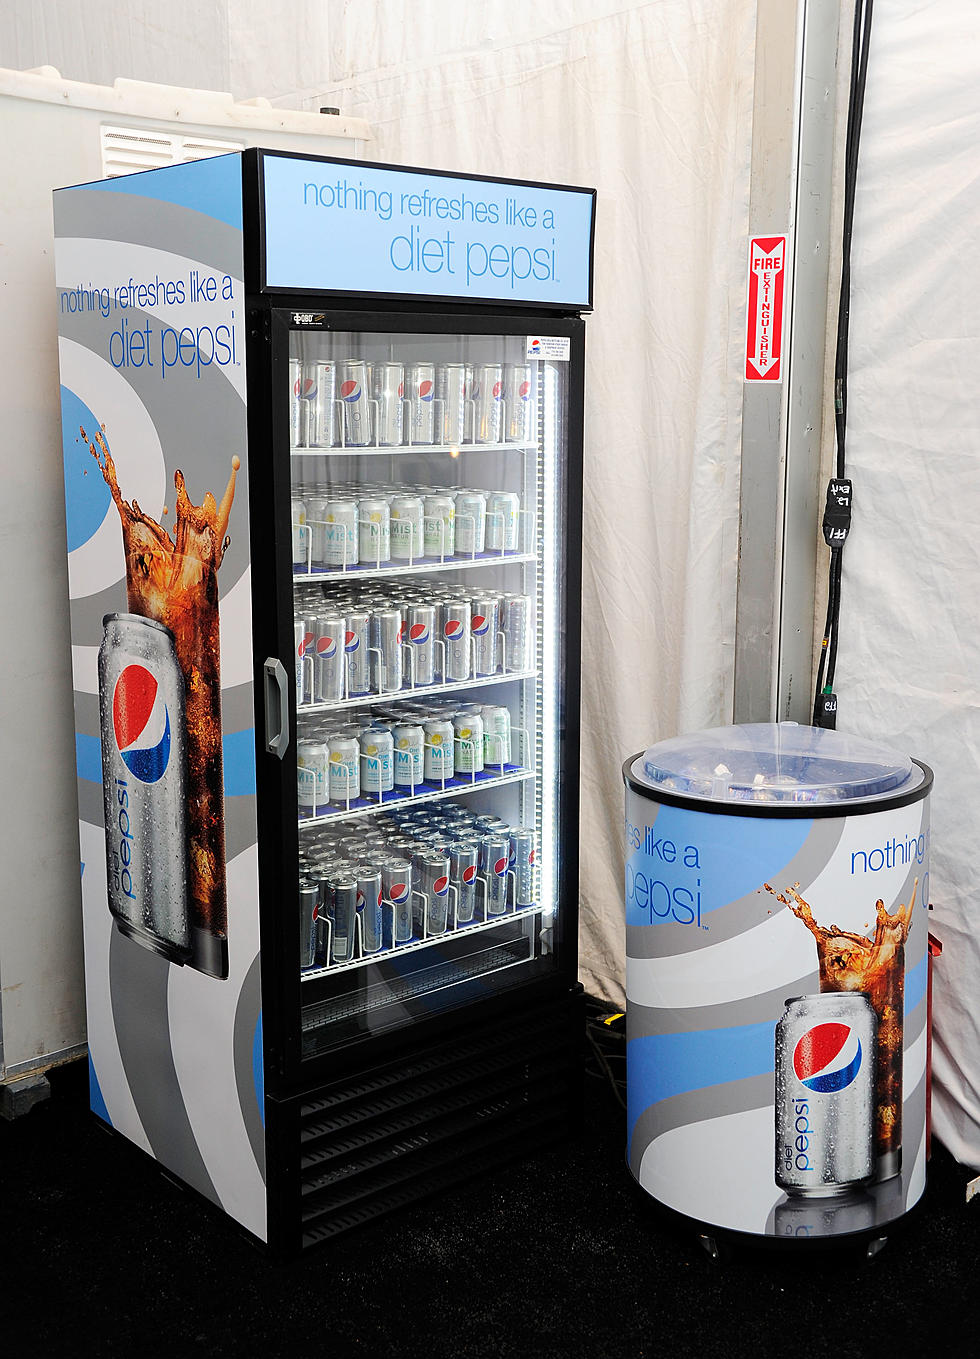 Pepsi’s Mid-Calorie Soda Aims To Win Back Drinkers